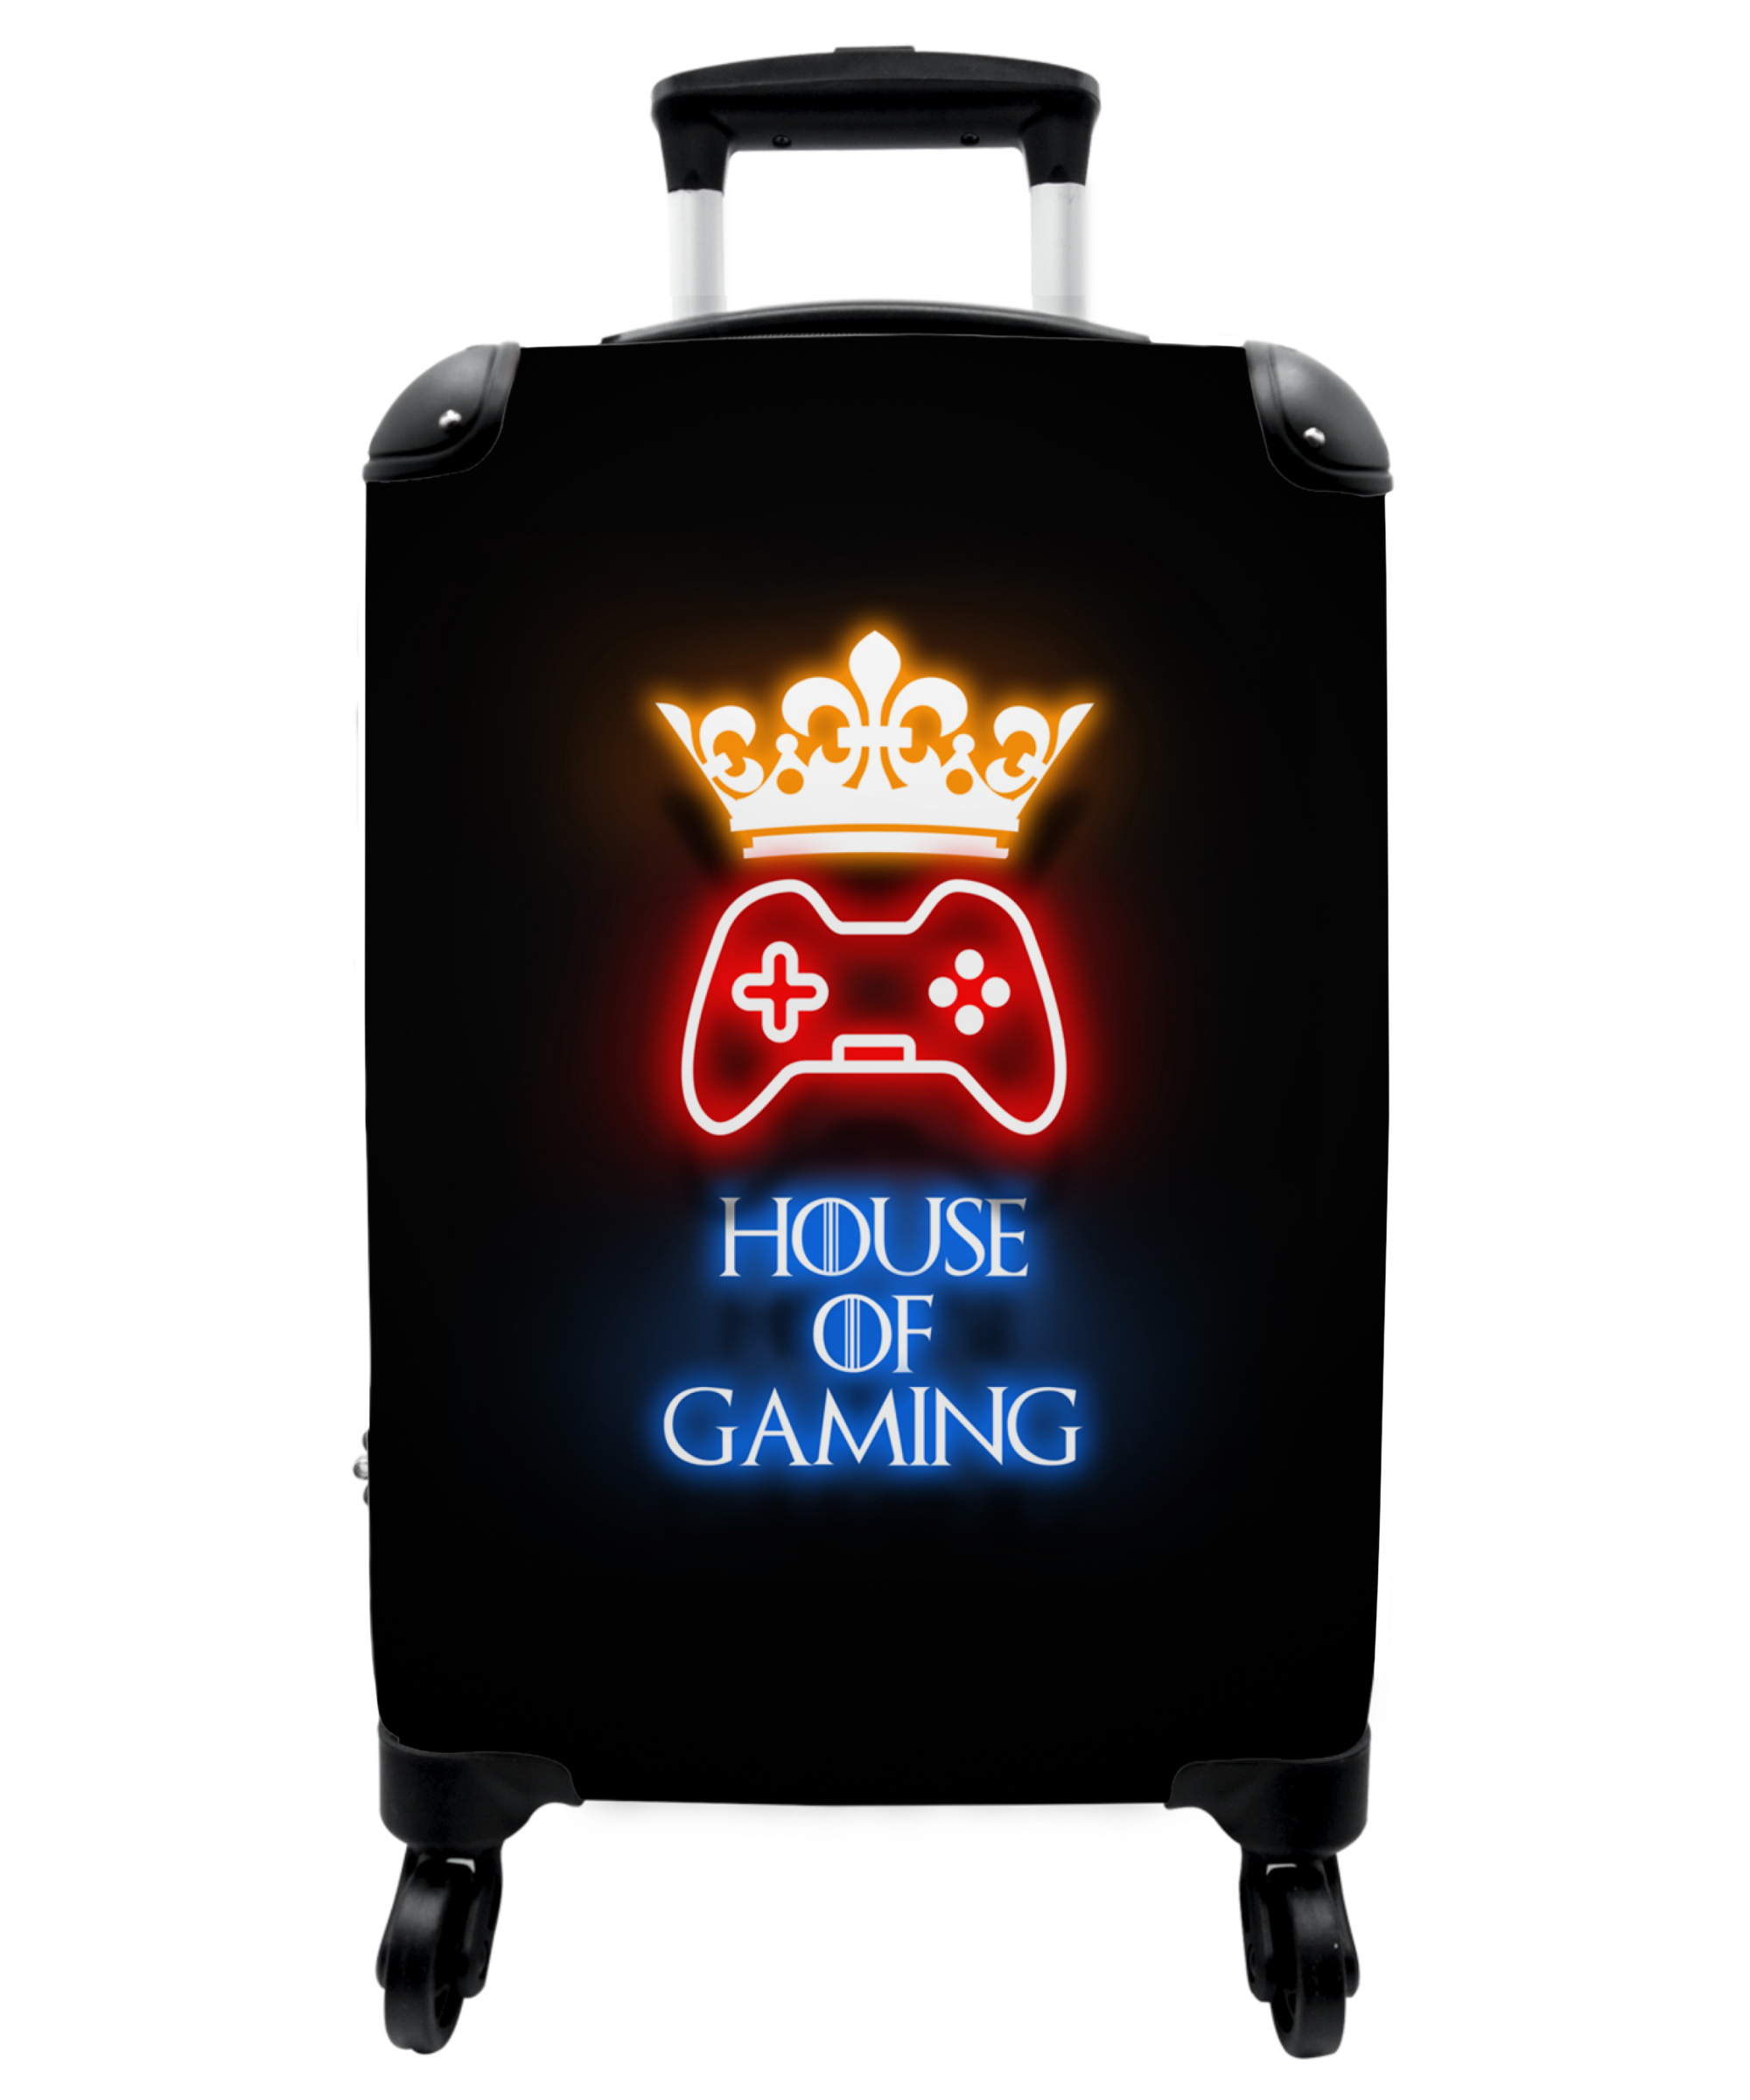 Koffer - Gaming quotes - Neon - House of gaming - Kroon - Tekst